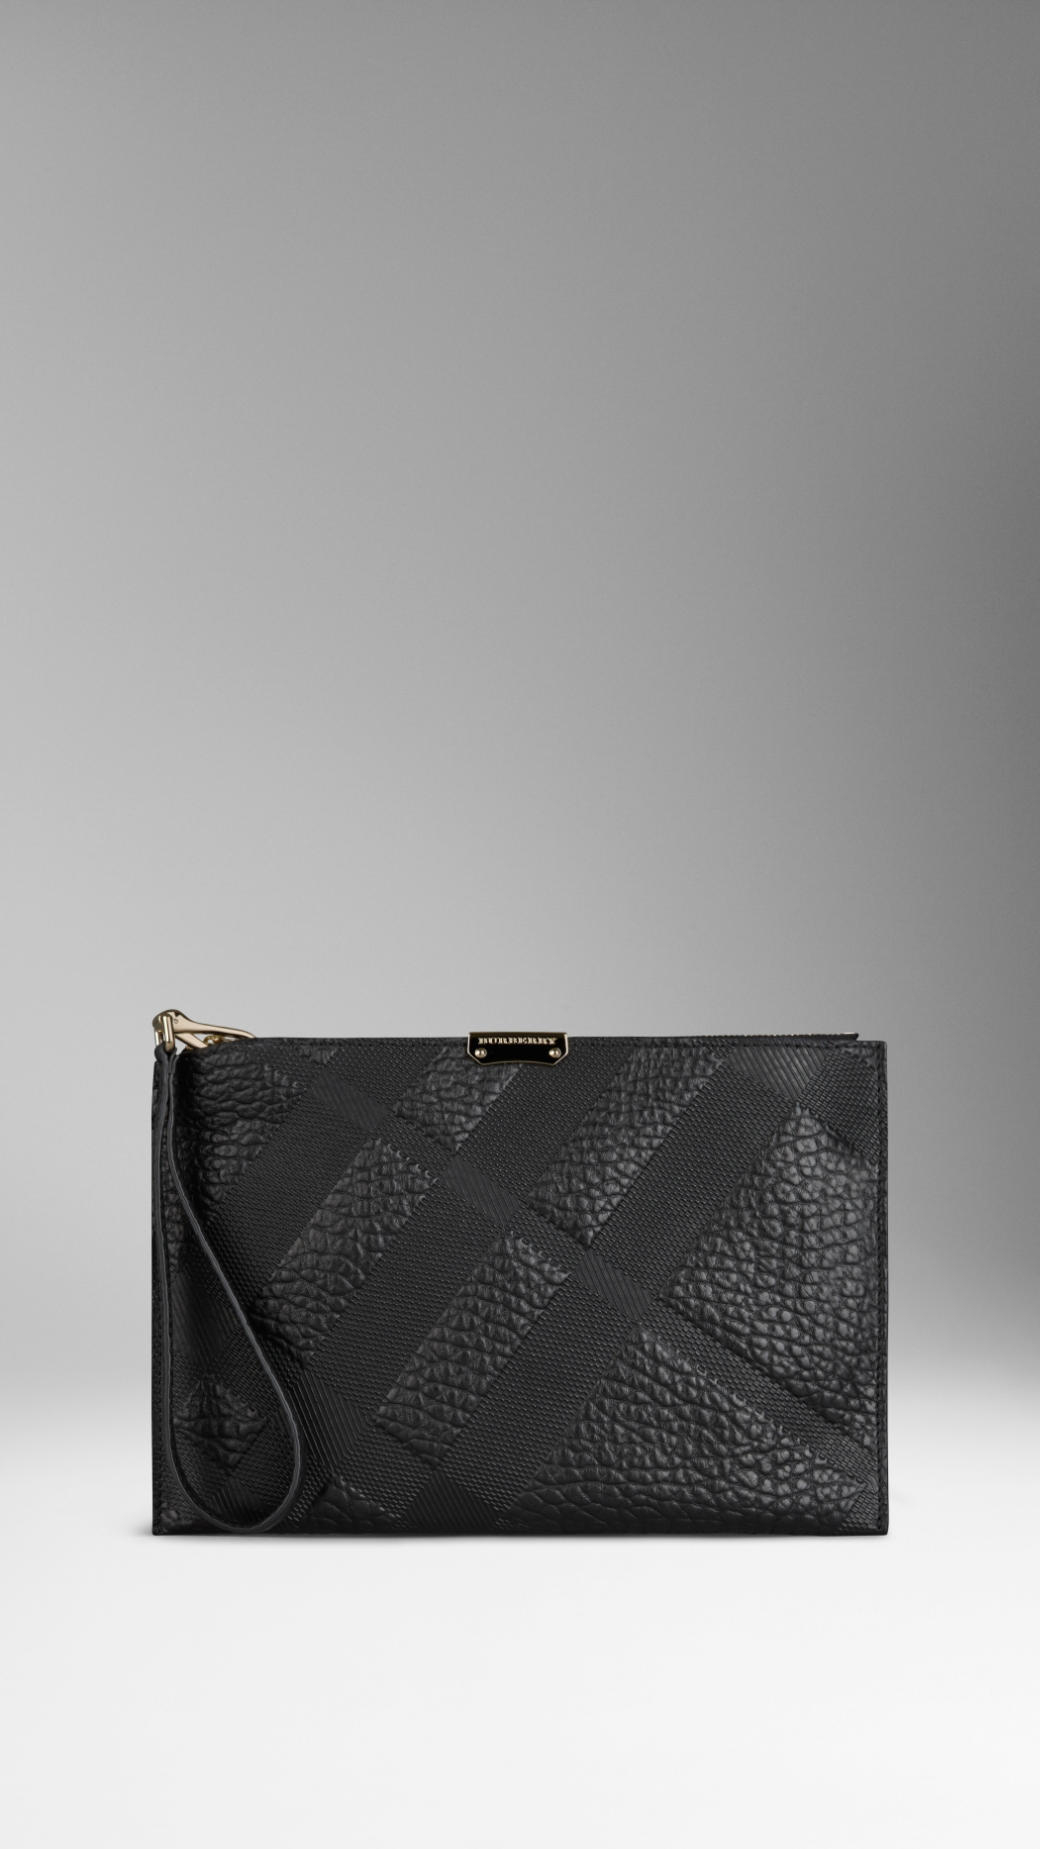 Burberry Embossed Check Signature Grain Leather Wristlet in Black - Lyst